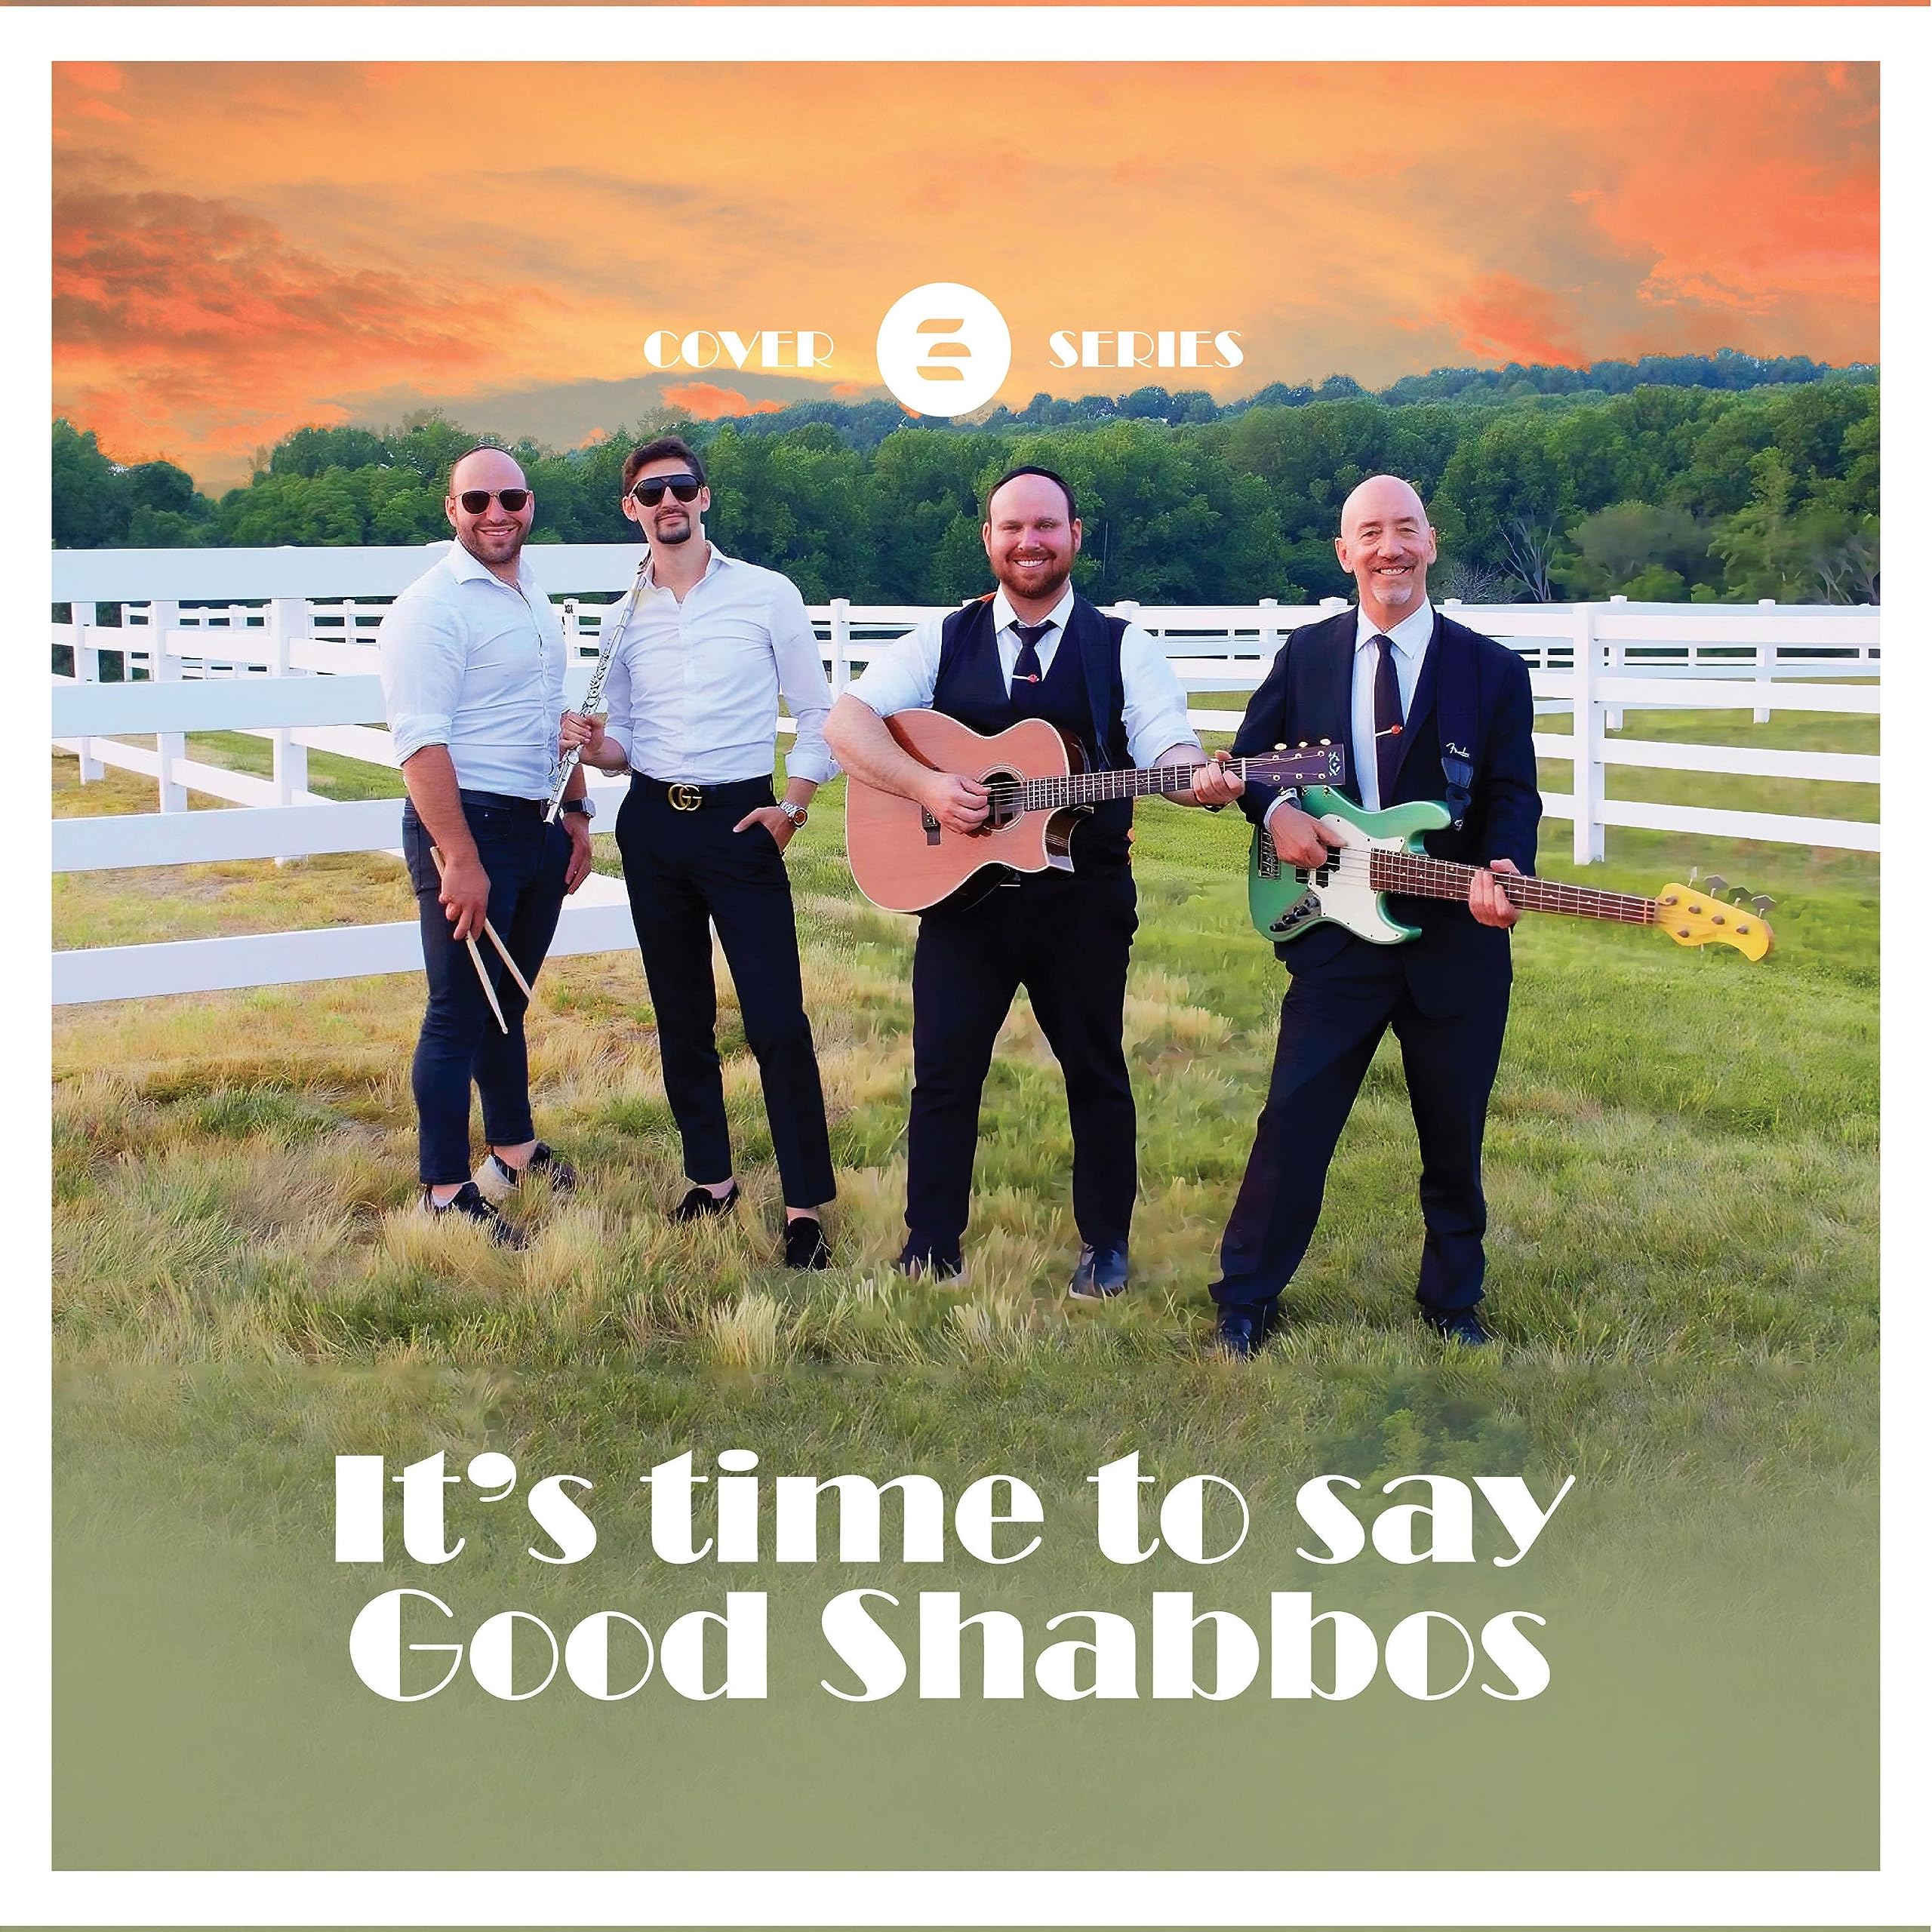 En3rgy - It's time to say Good Shabbos [Cover] (Single)